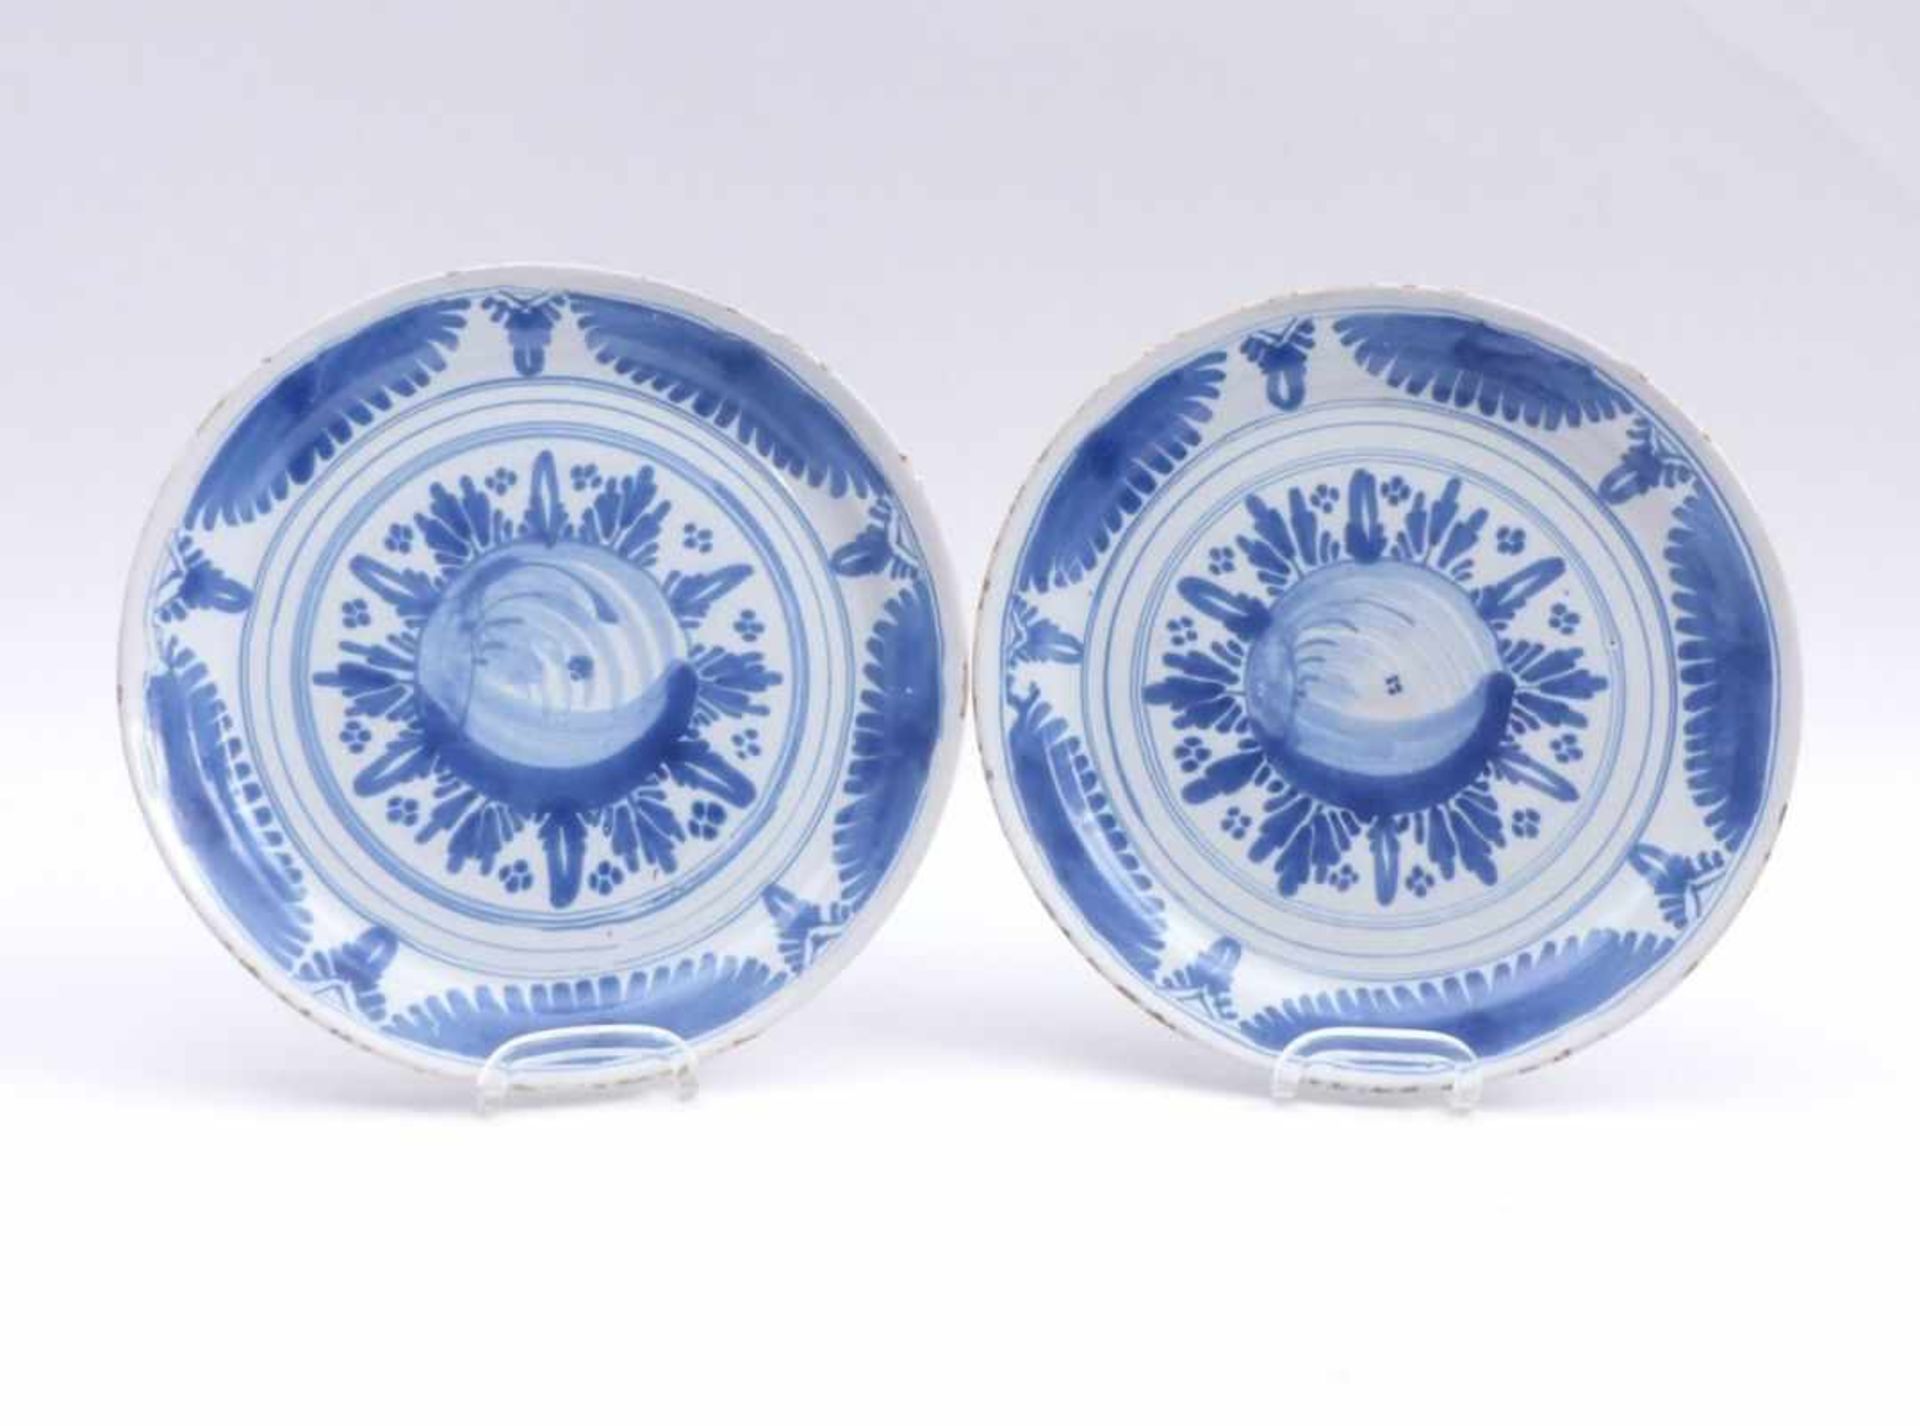 Pair of plates with fruit decorationBayreuth, 18th century.Round, flat shape with narrow lip;